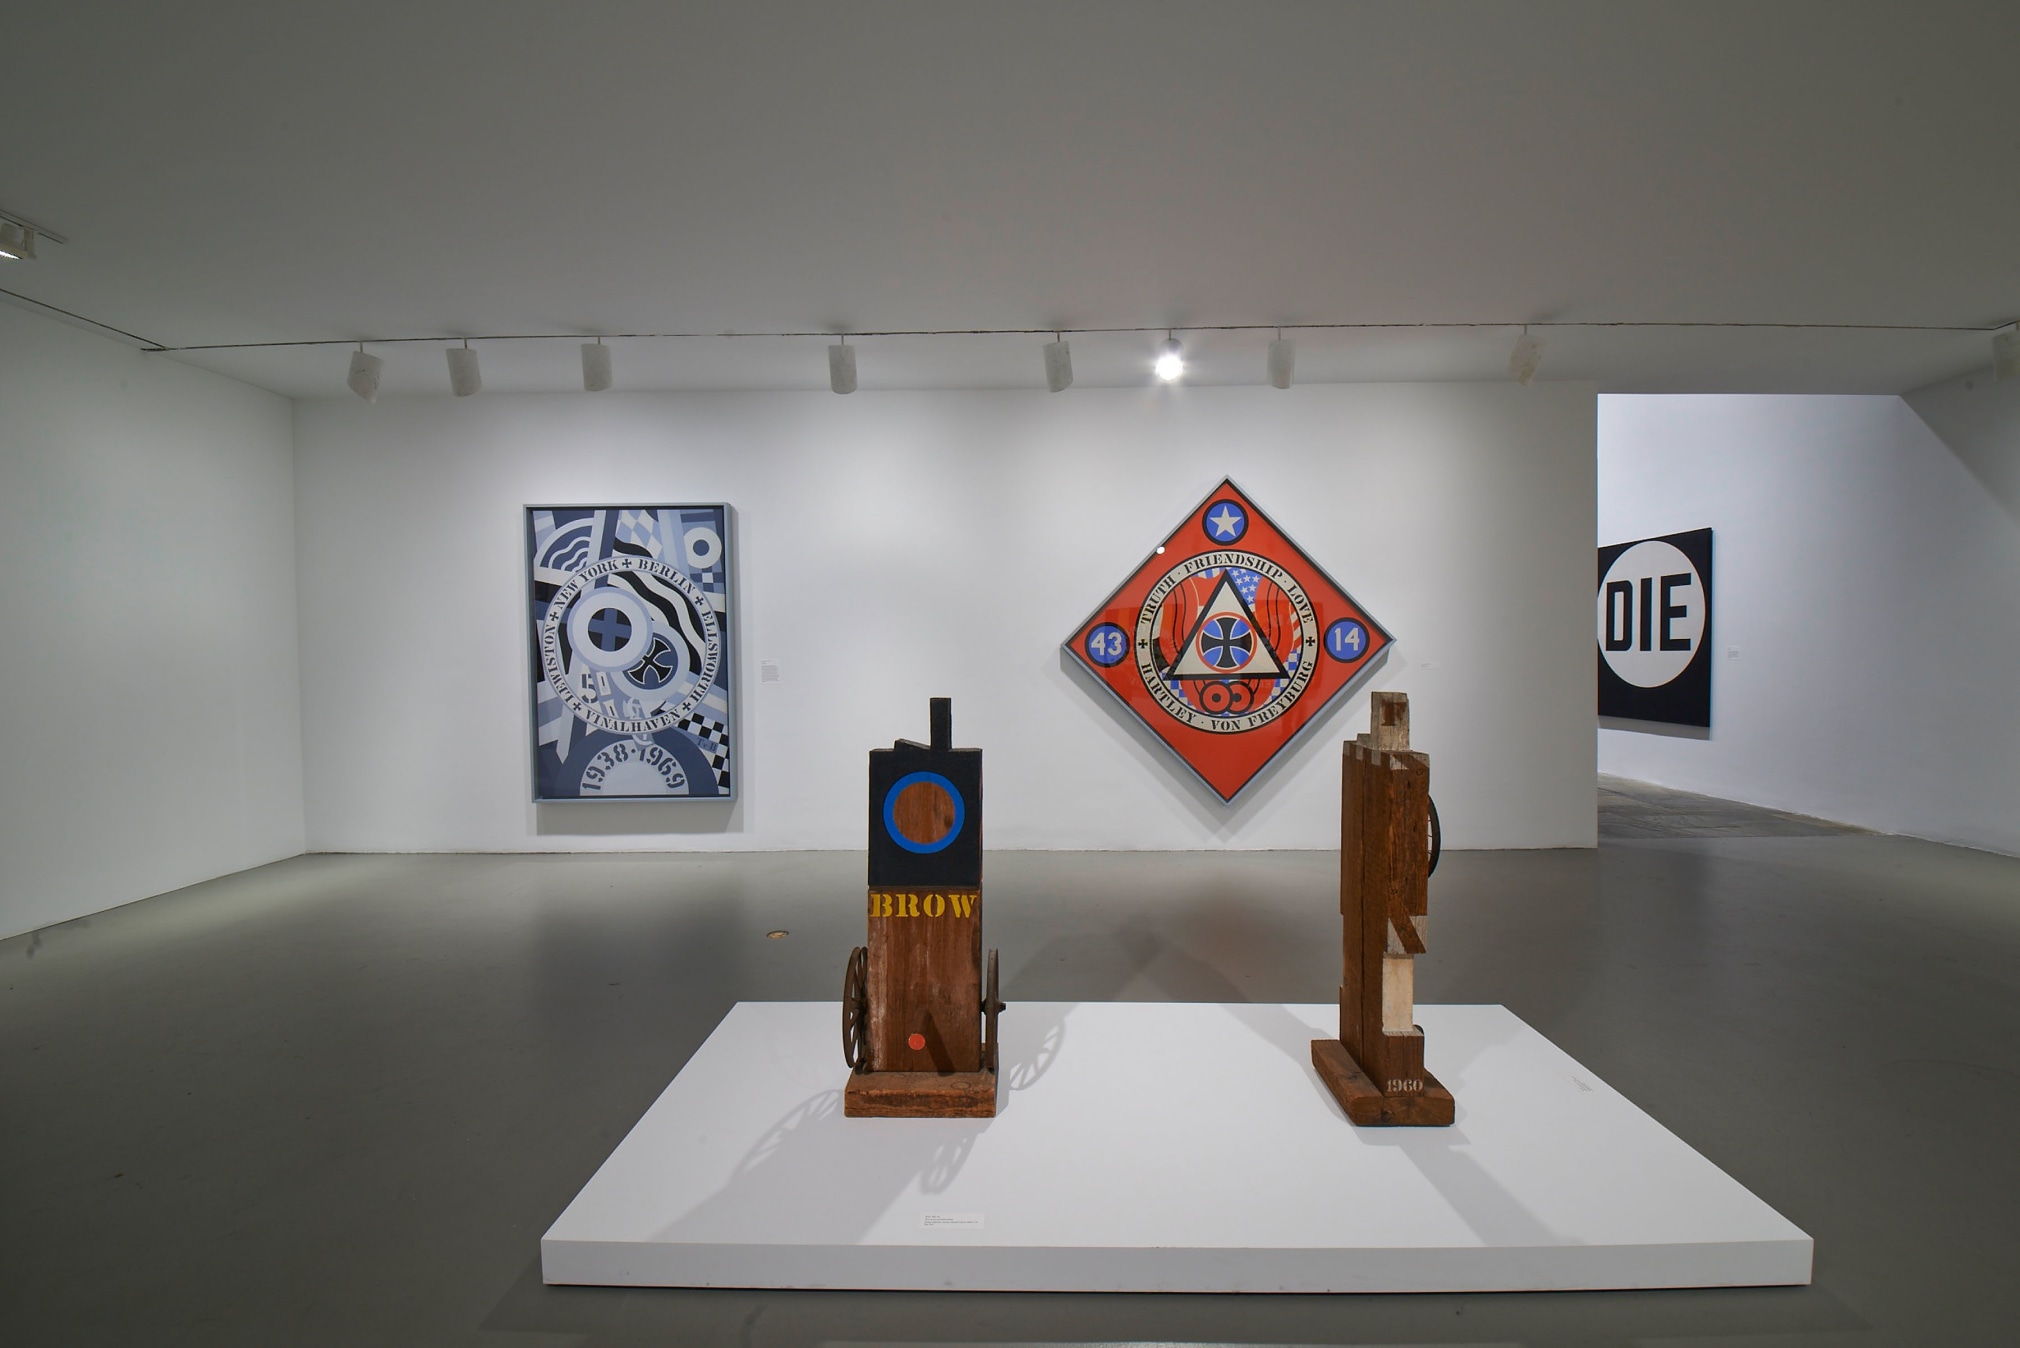 Installation view of Robert Indiana: Beyond LOVE, Whitney Museum of American Art, New York, September 26, 2013&ndash;January 5, 2014. Left to right, KvF IV (Hartley Elegy) (1989&ndash;94), Brow (1960&ndash;62), M (1960), and KvF X (Hartley Elegy) (1989&ndash;94). Photo: Tom Powel Imaging